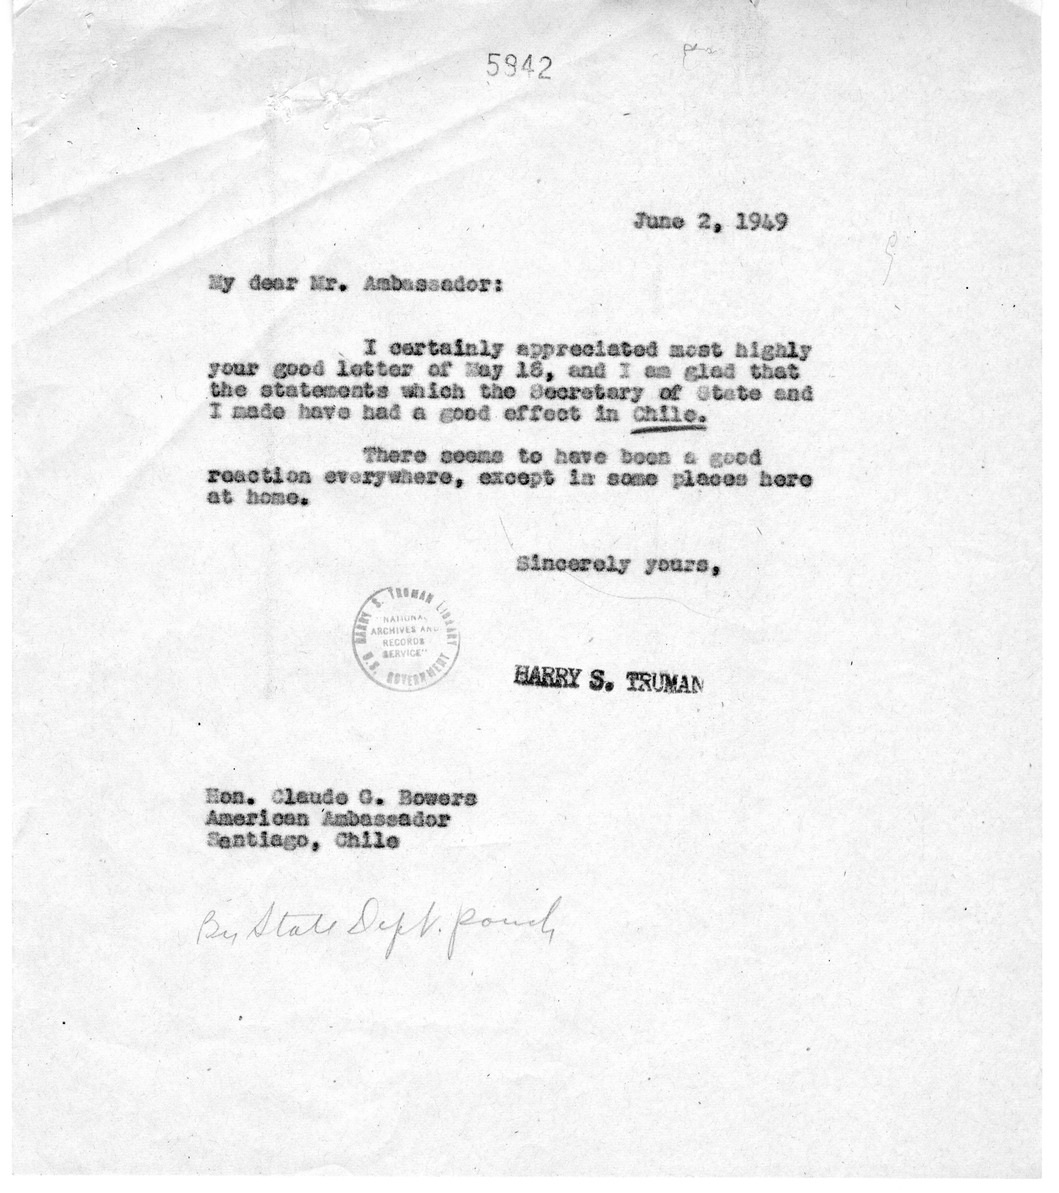 Correspondence Between Ambassador Claude Bowers and President Harry S. Truman, with Attachment